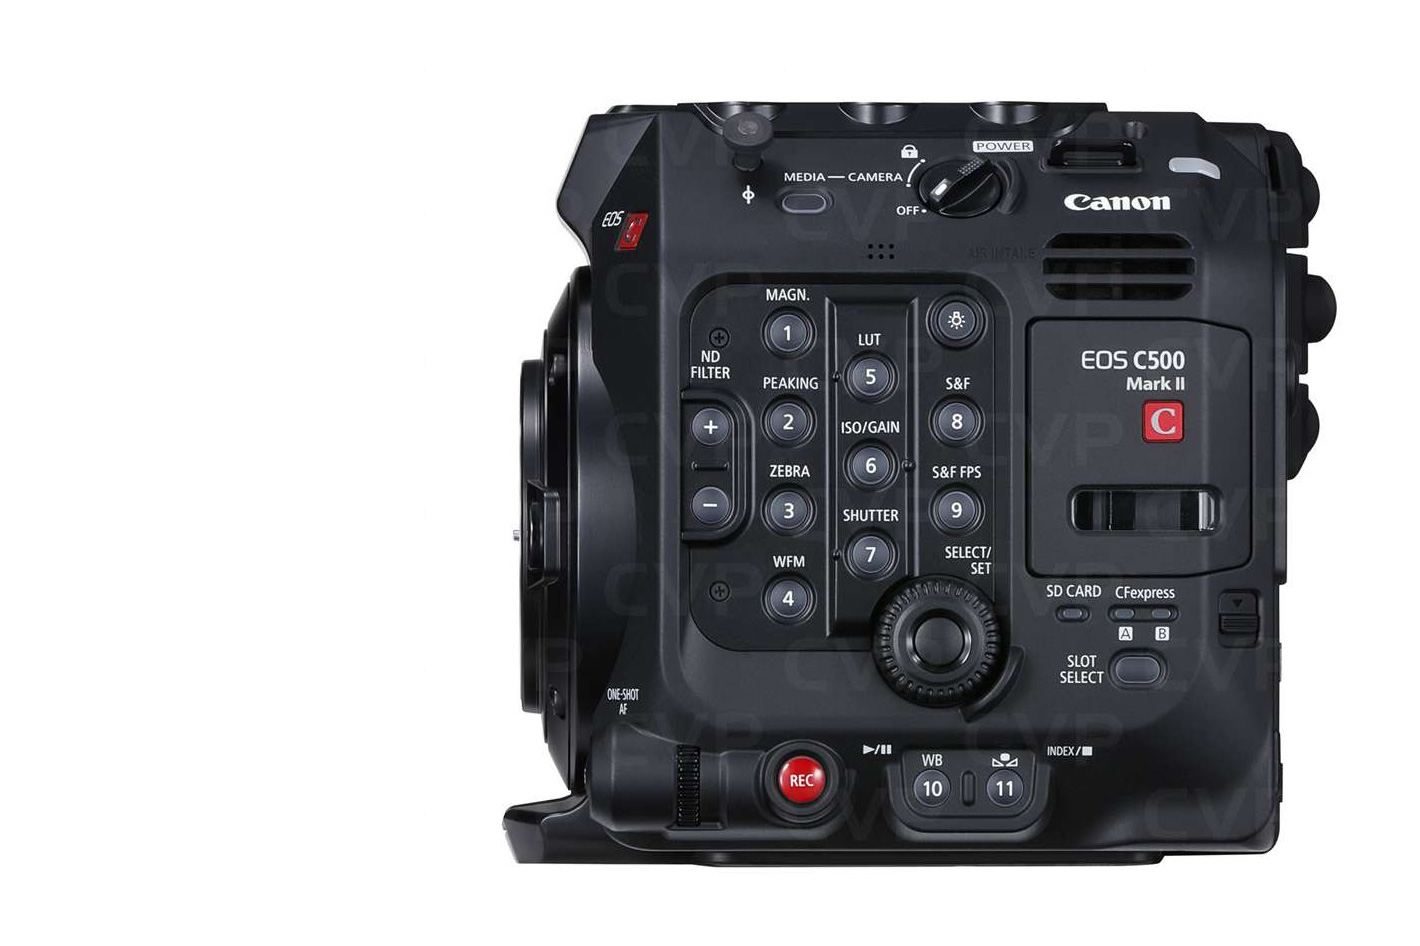 EOS C300 Mark III and EOS C500 Mark II are Camera to Cloud compatible